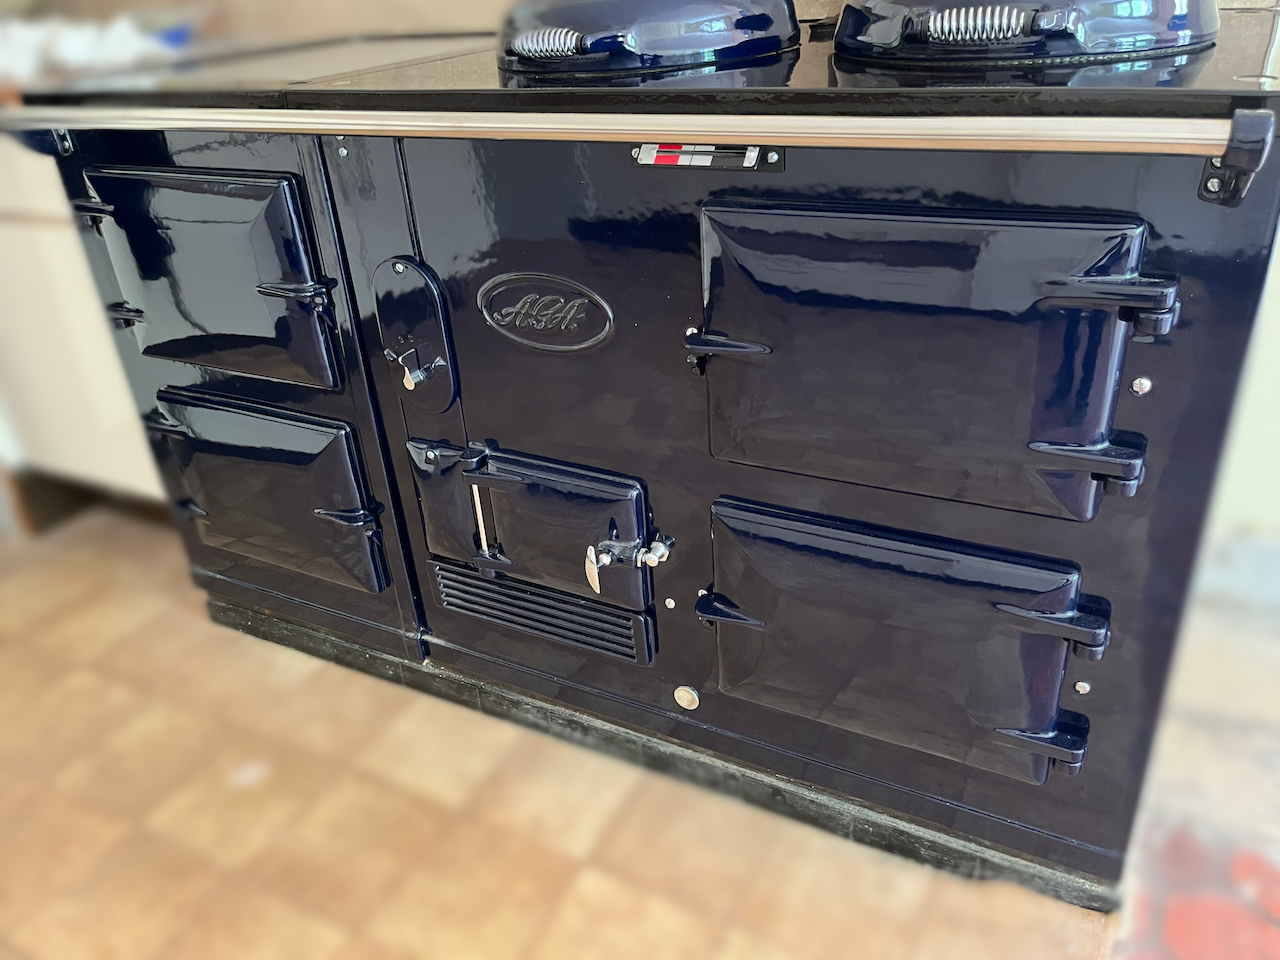 Reconditioned 4 Oven Gas Aga Cooker (Dark Blue)